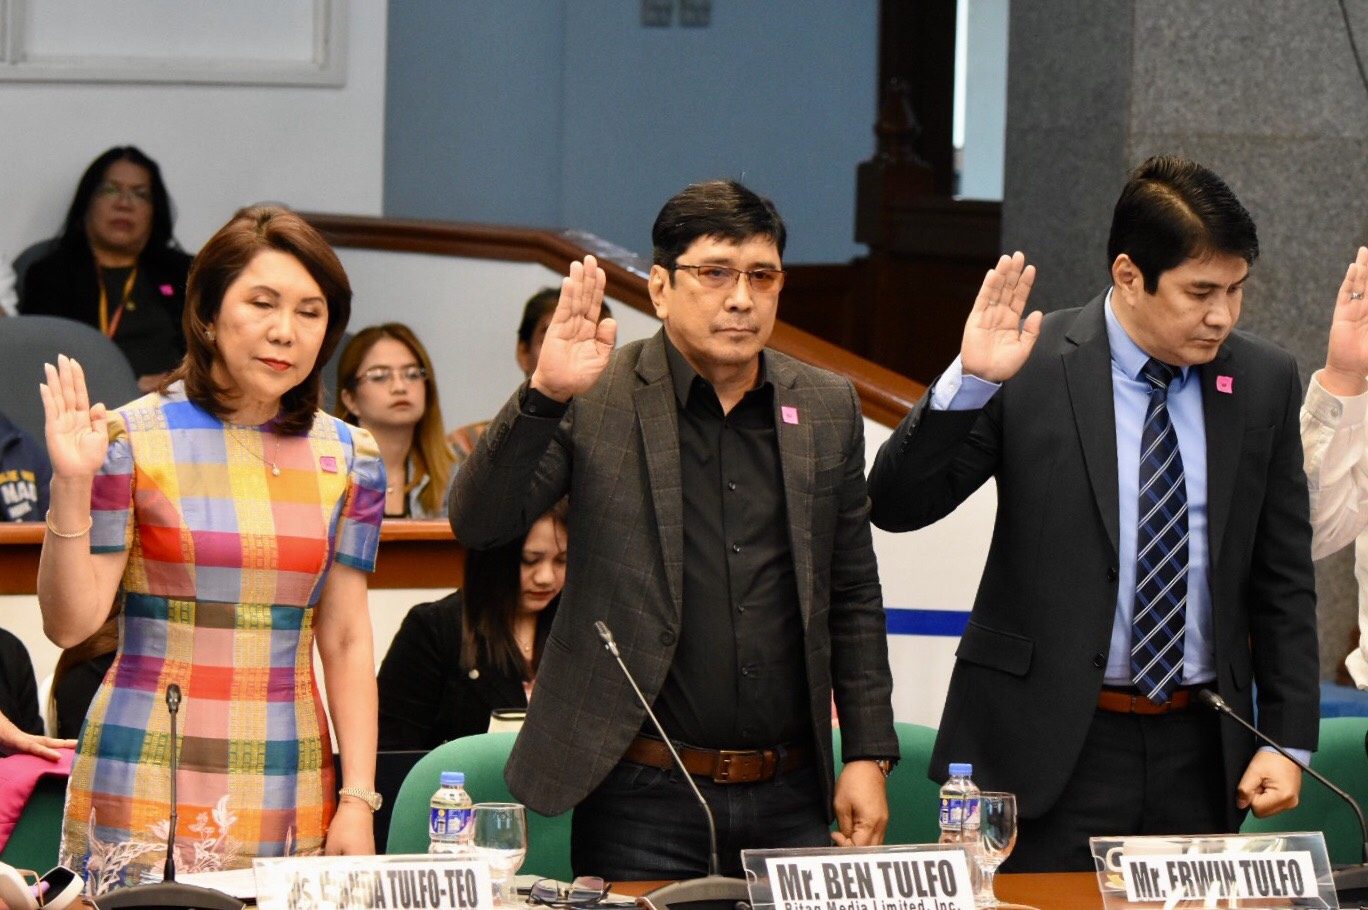 Tulfos: We will not return P60M to government